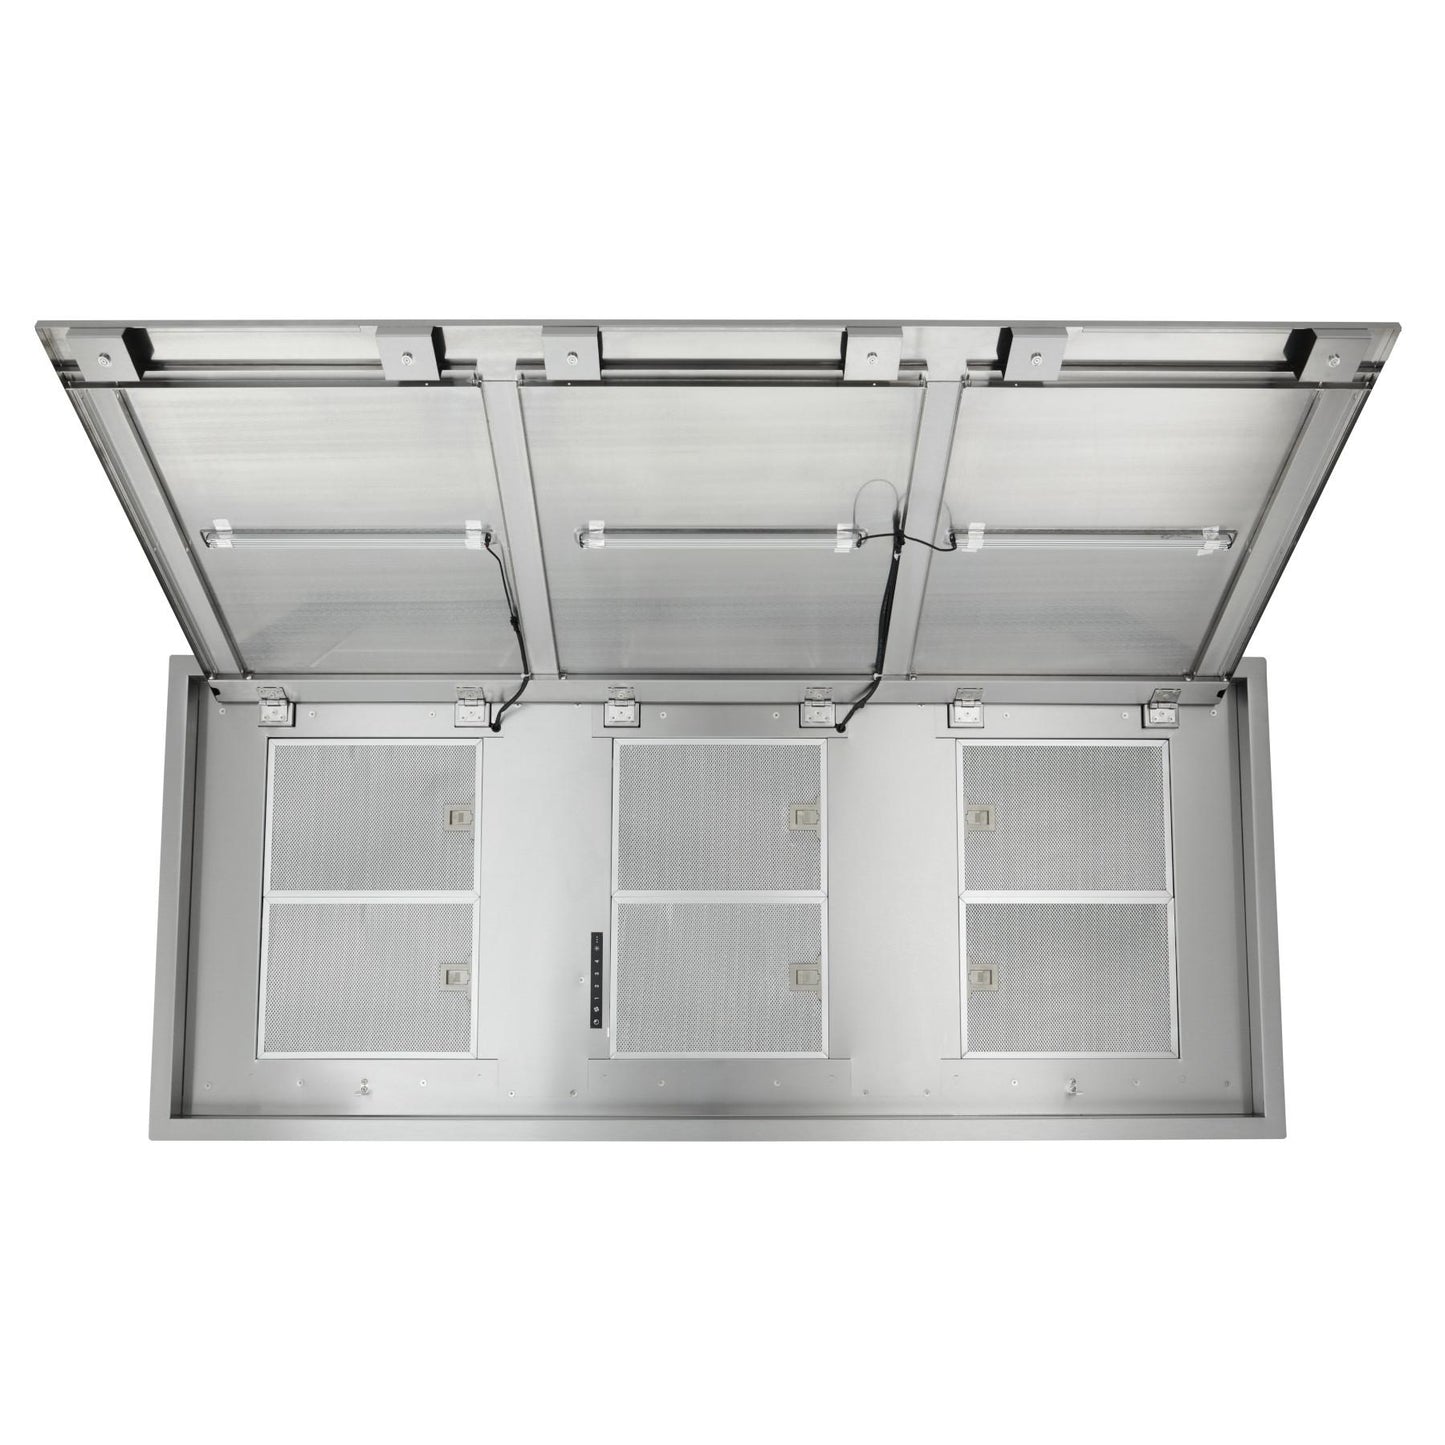 Best Range Hoods HBC163ESS 63-Inch Brushed Stainless Steel Ceiling Mounted Range Hood With Led Light, Choice Of Blowers Sold Separately (Hbc1 Series)